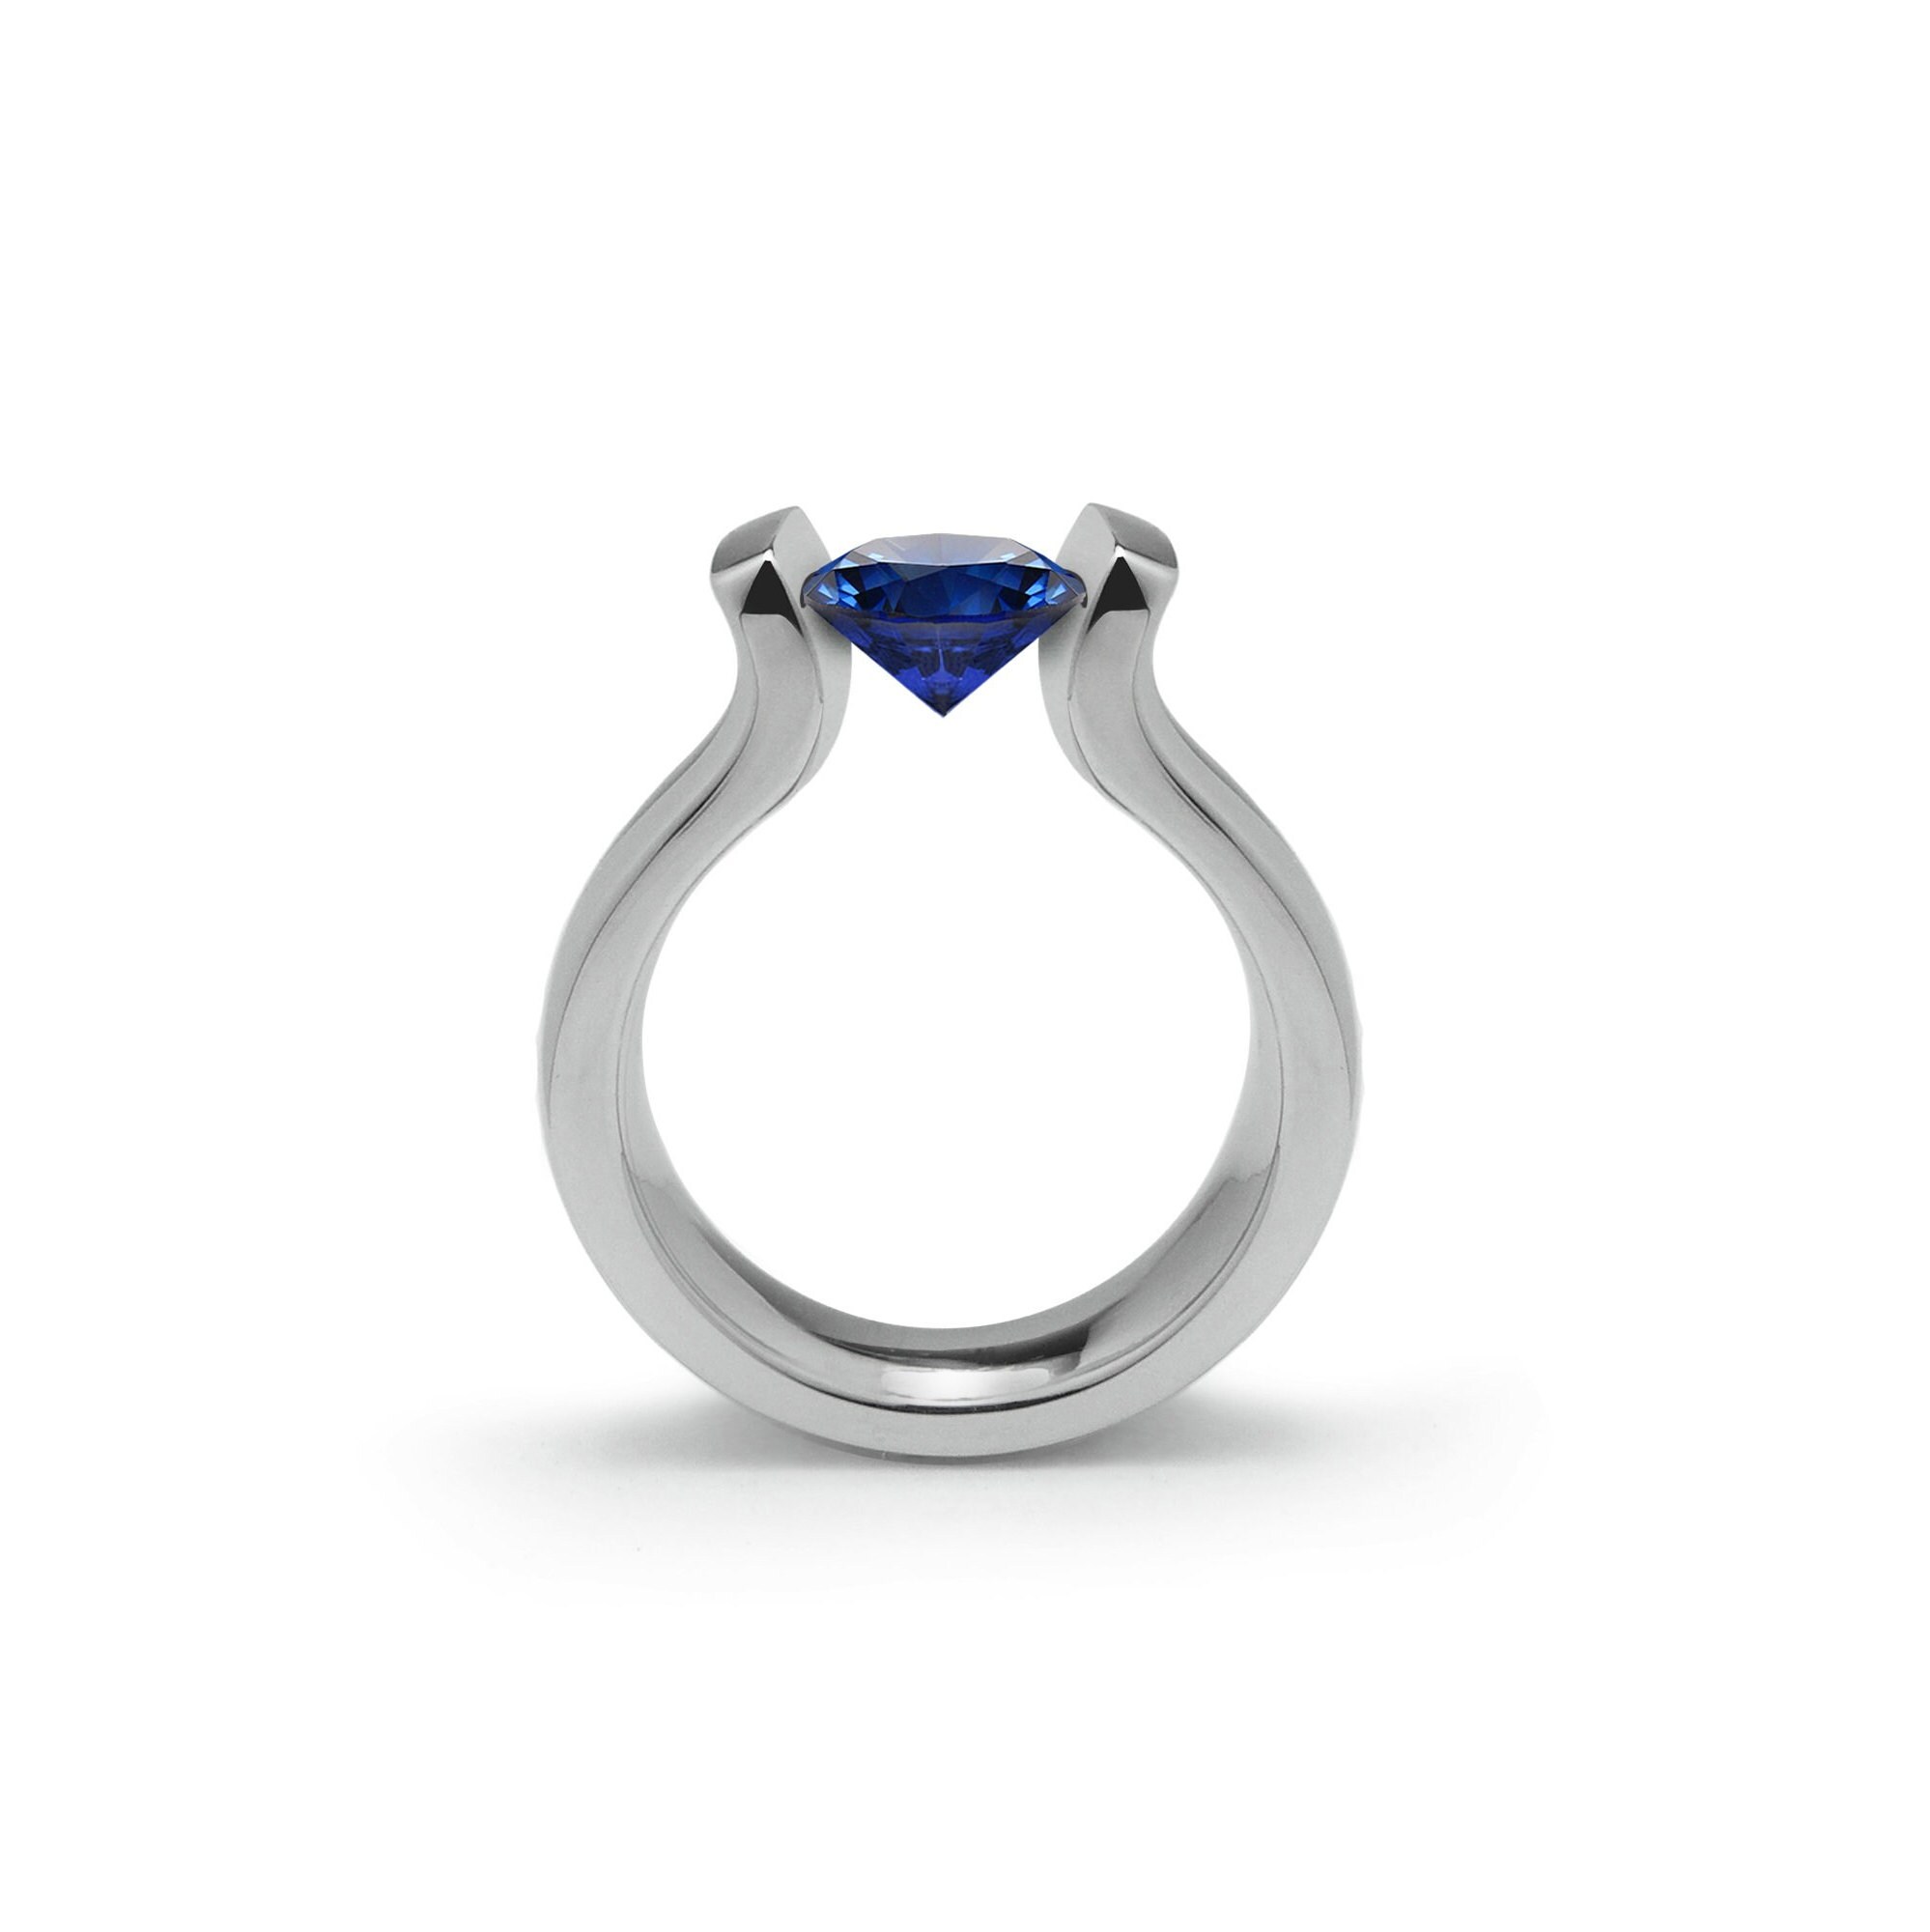 0.75ct Blue Sapphire Lyre shaped Tension Set Ring in Stainless Steel by  Taormina Jewelry